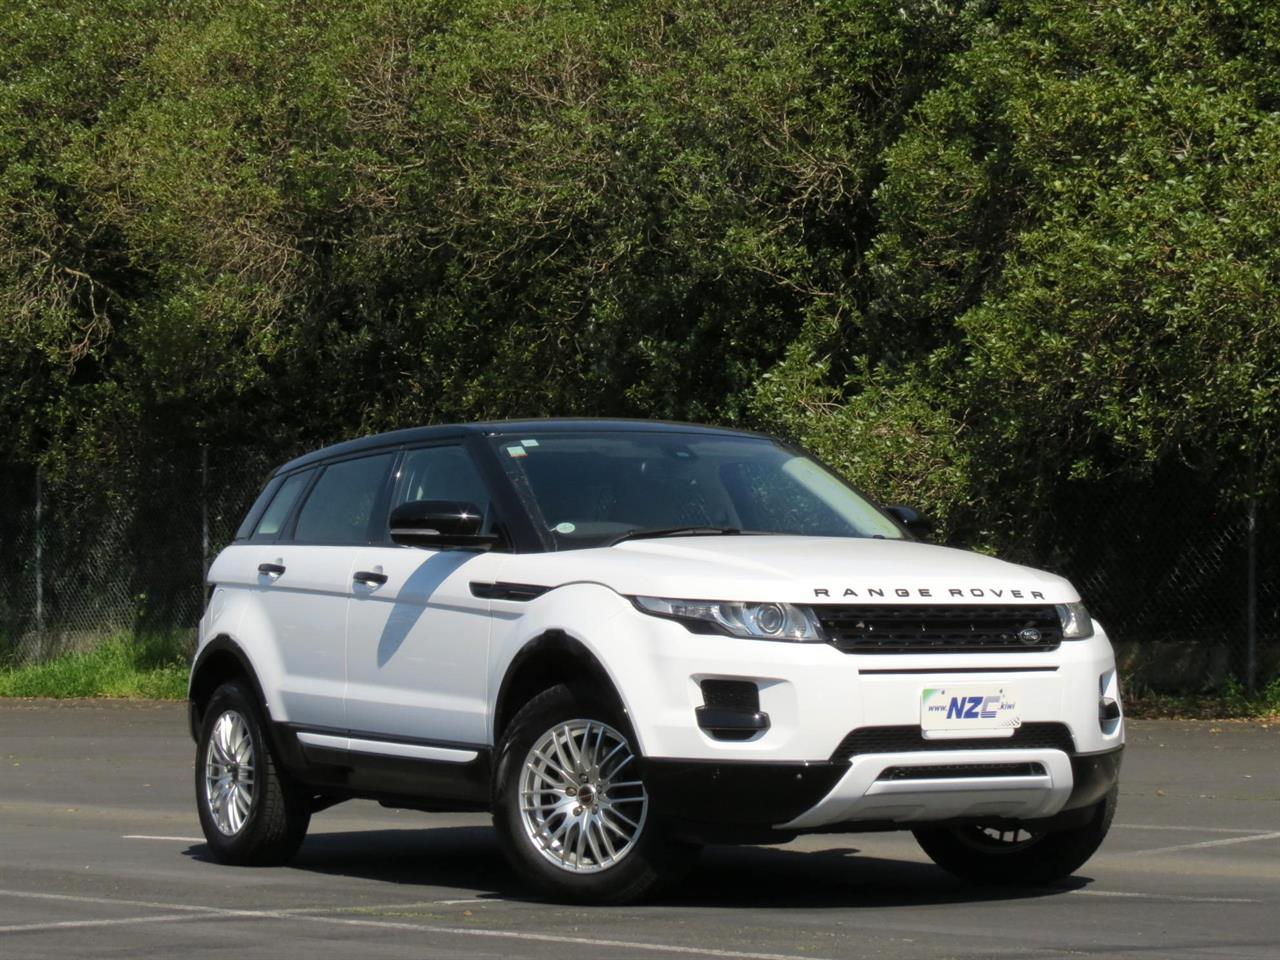 NZC 2013 Land Rover Range Rover Evoque just arrived to Auckland